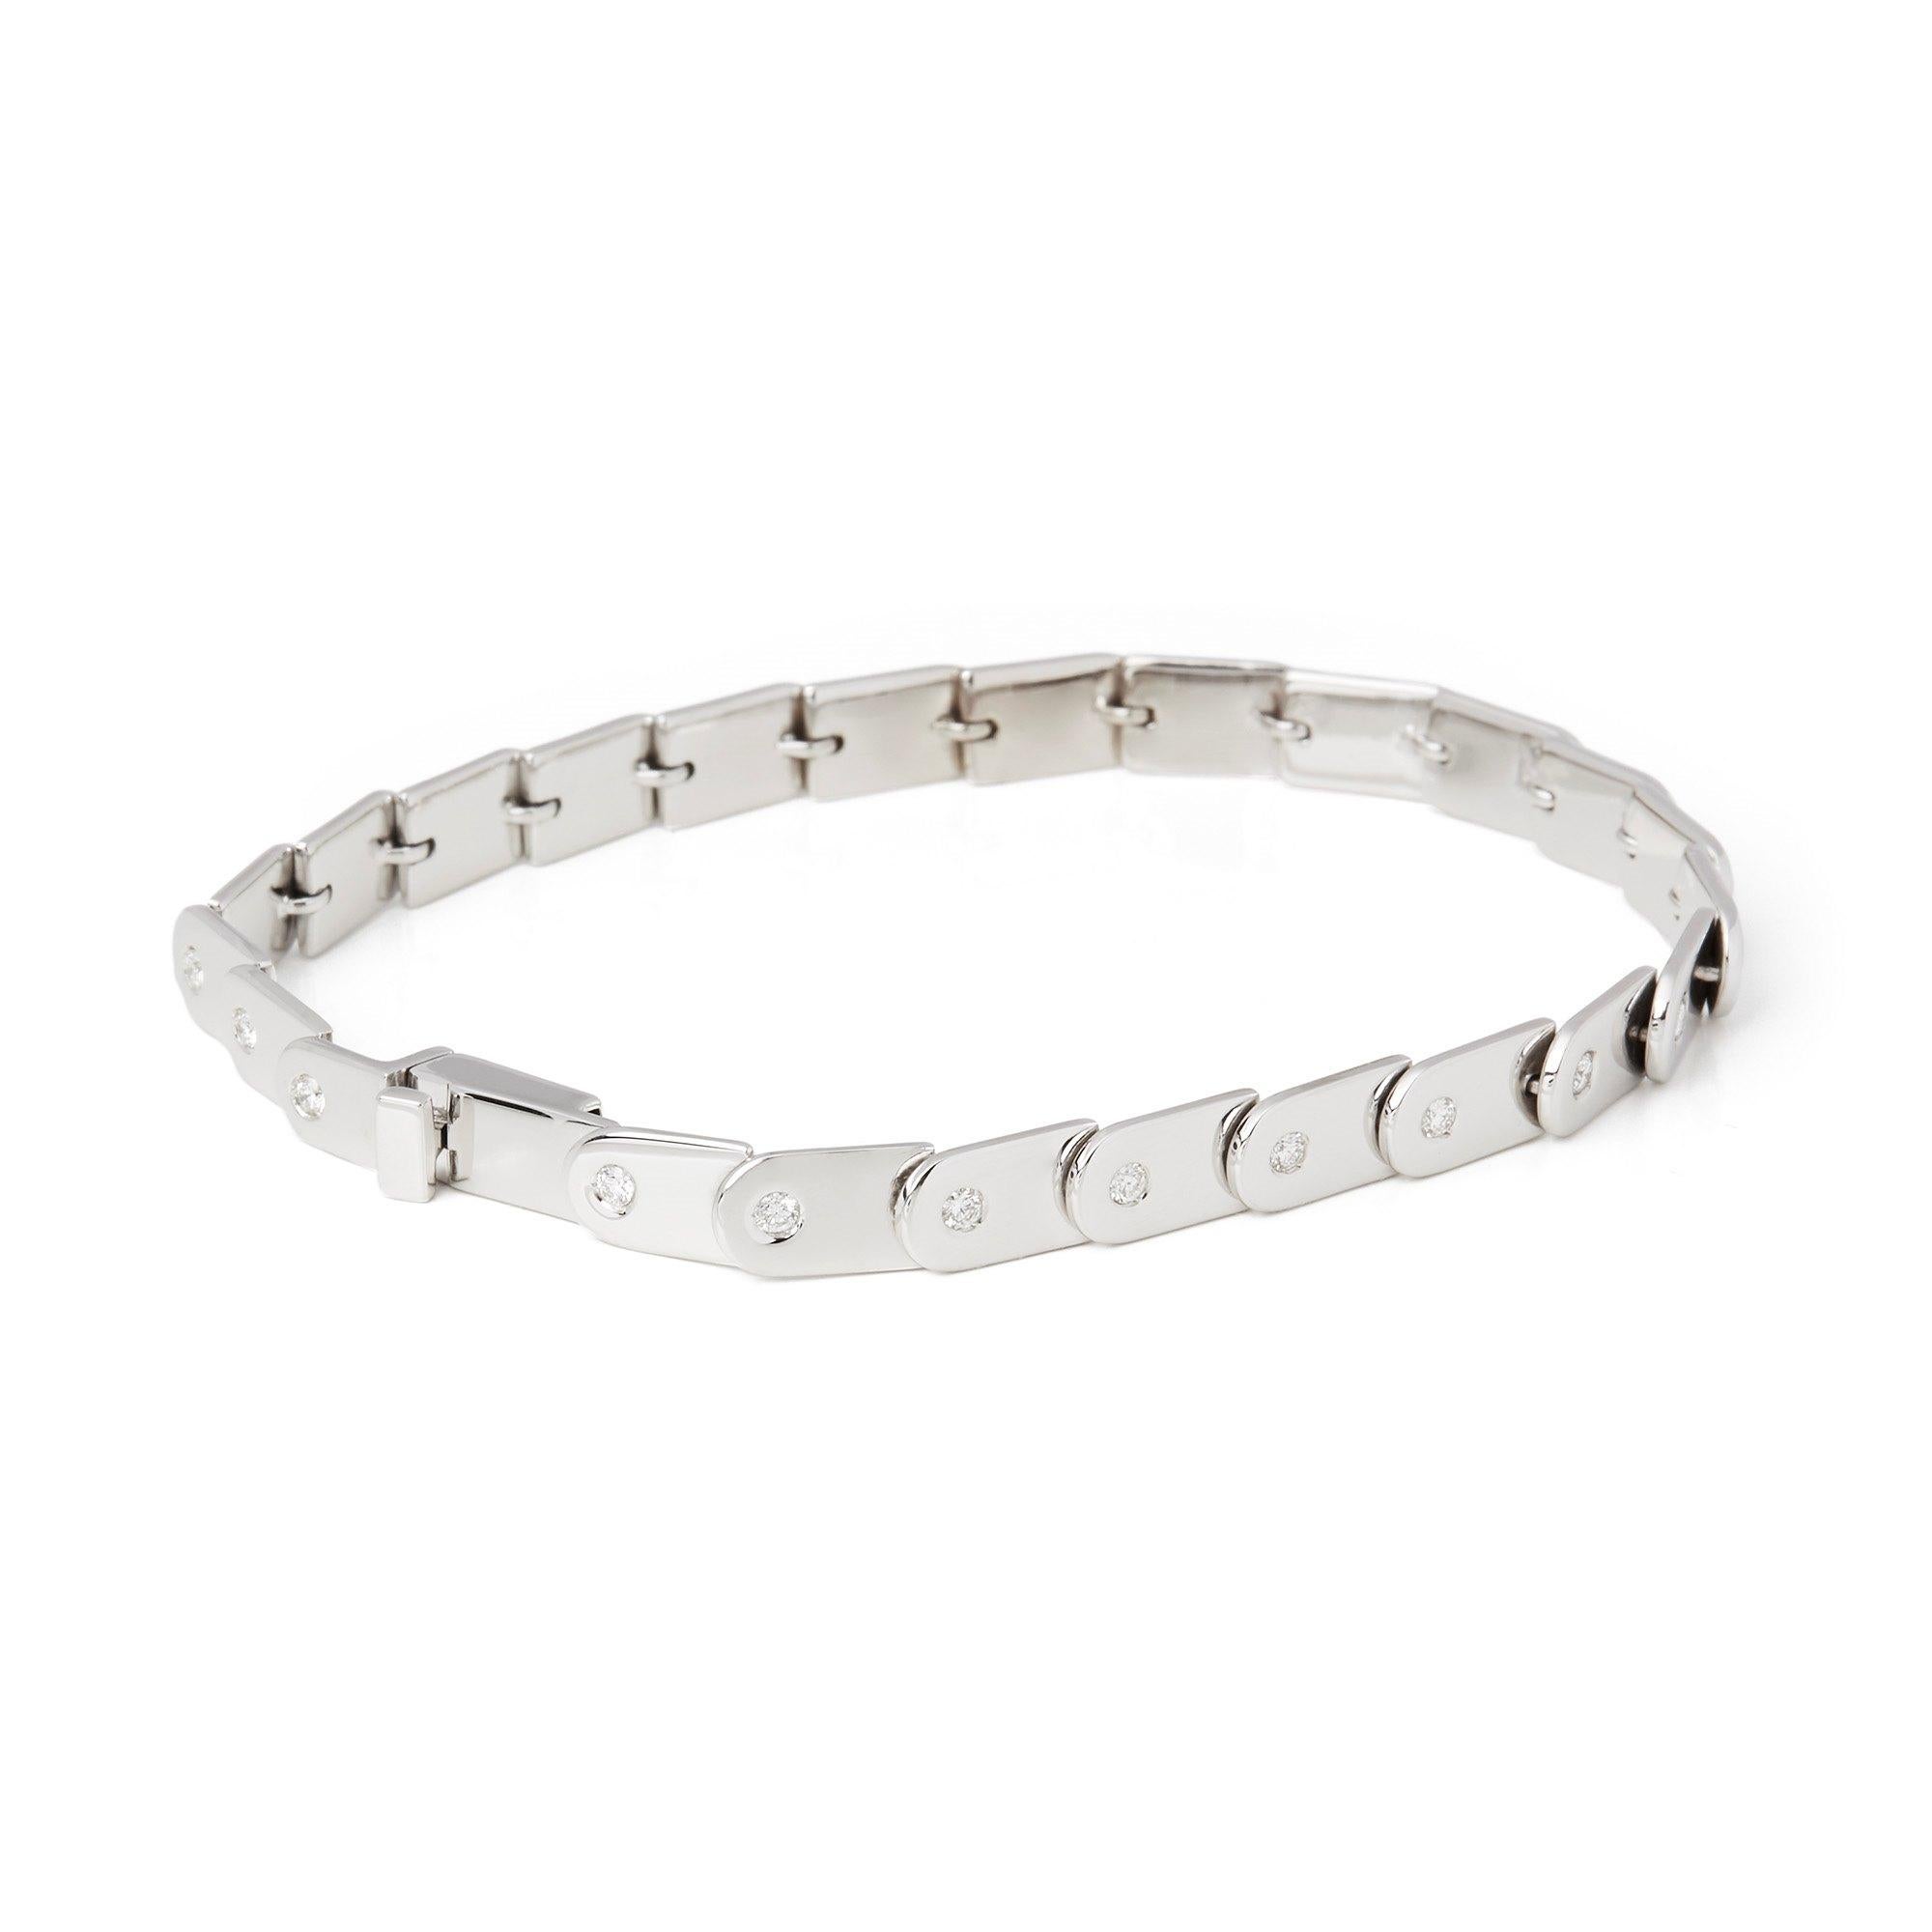 This Bracelet by Gucci features Articulated Link Sections set with Twenty Four Round Brilliant Cut Diamonds Totalling 1.20cts. Mounted in an 18k White Gold. Complete with Xupes Presentation Box. Our Xupes reference is COMJ239 should you need to